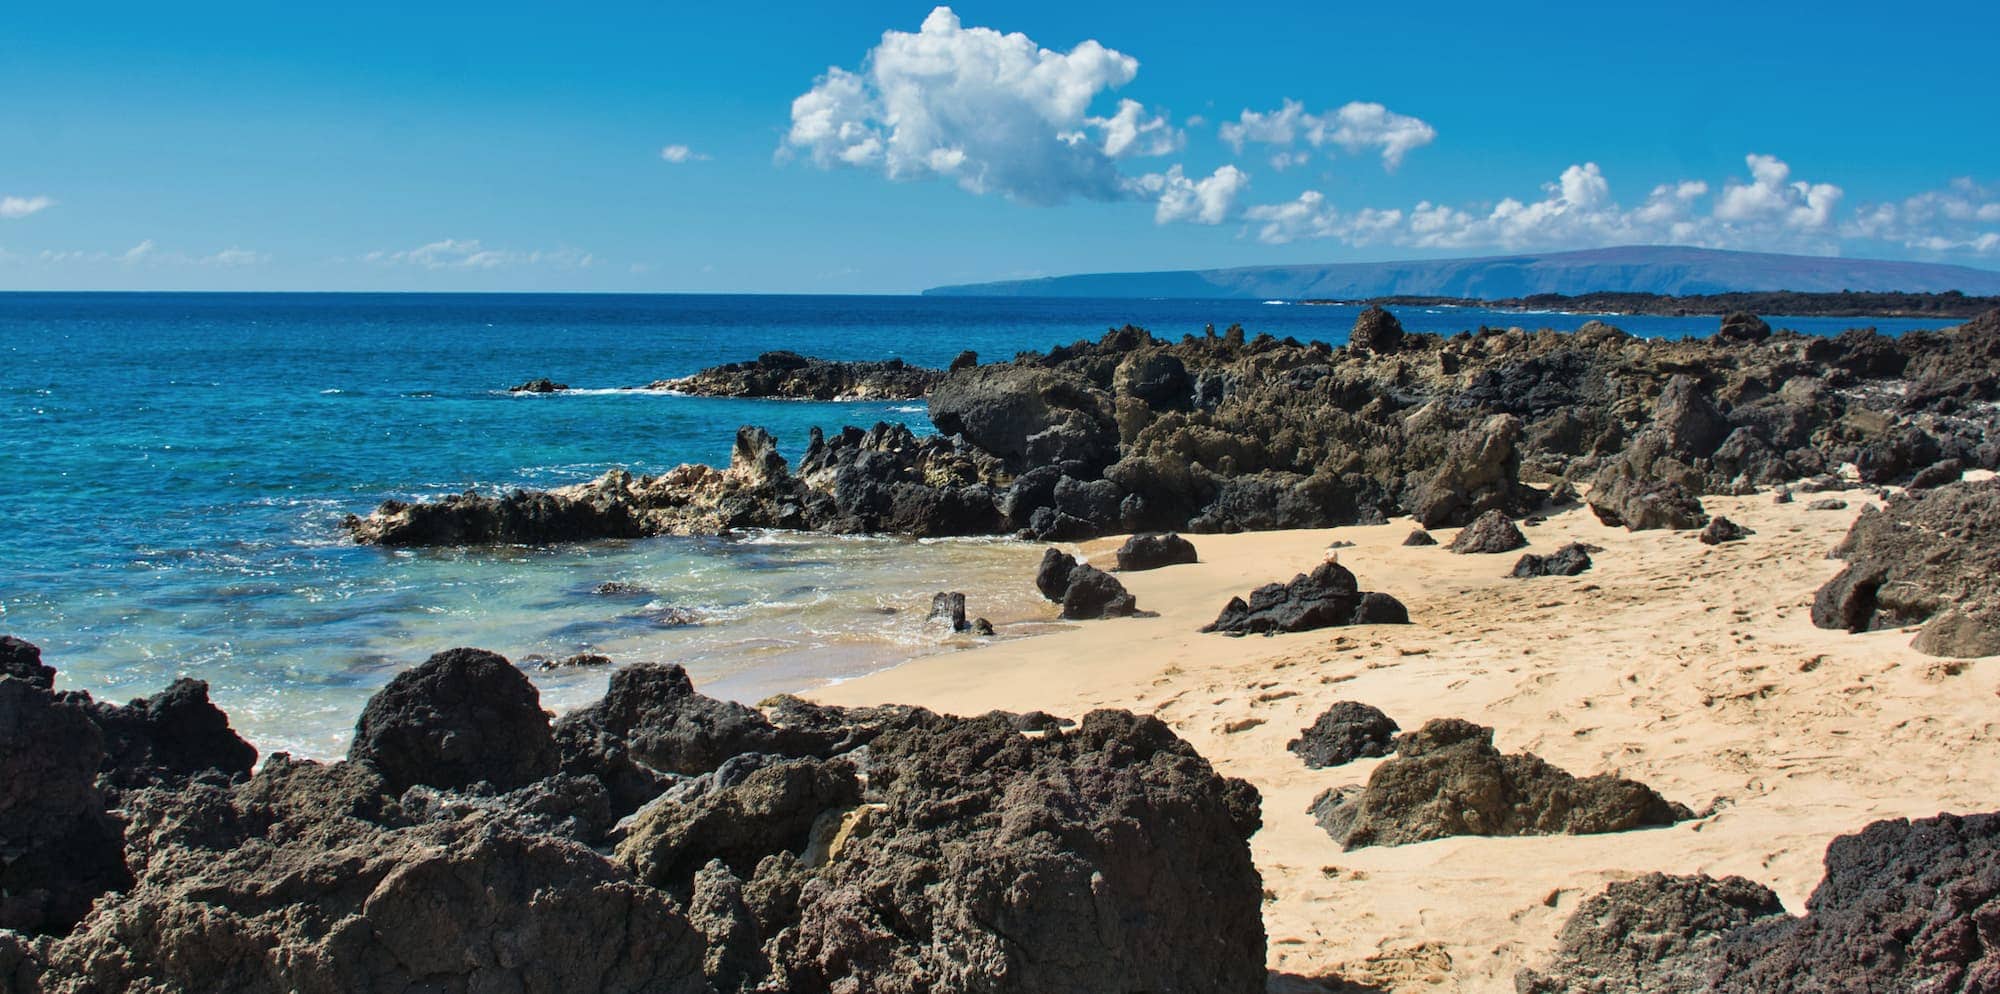 Our 15 favorite easy, intermediate, and difficult hikes on Maui